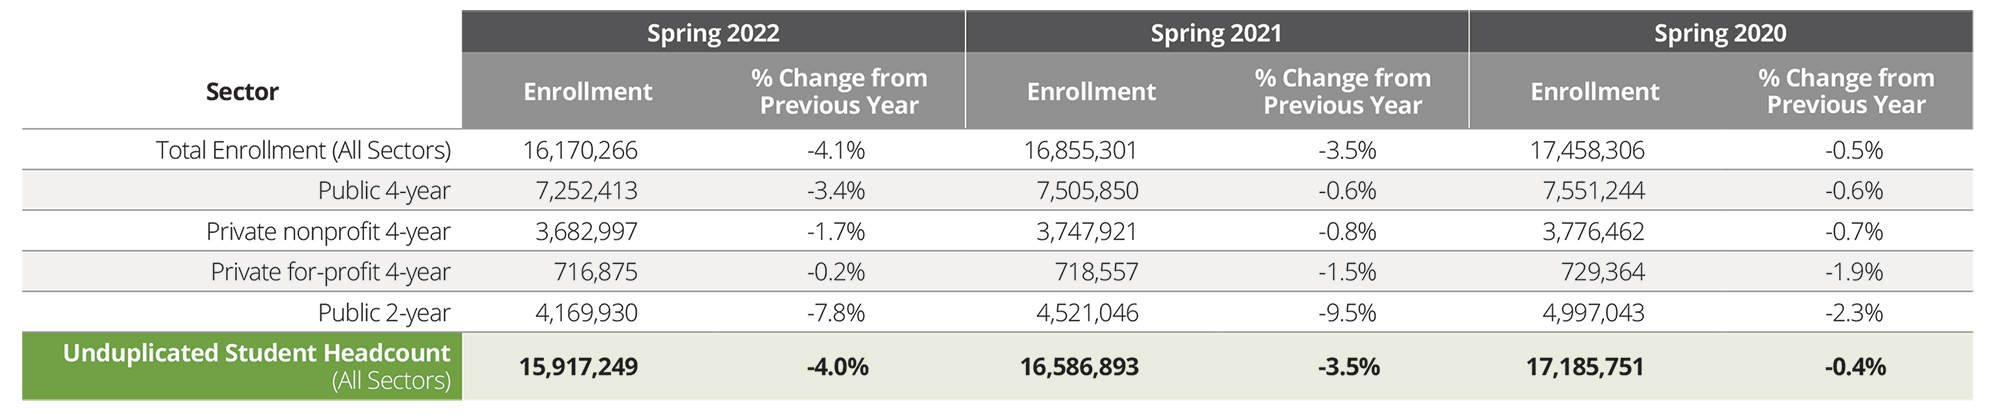 higher education marketing chart showing slumping enrollment numbers